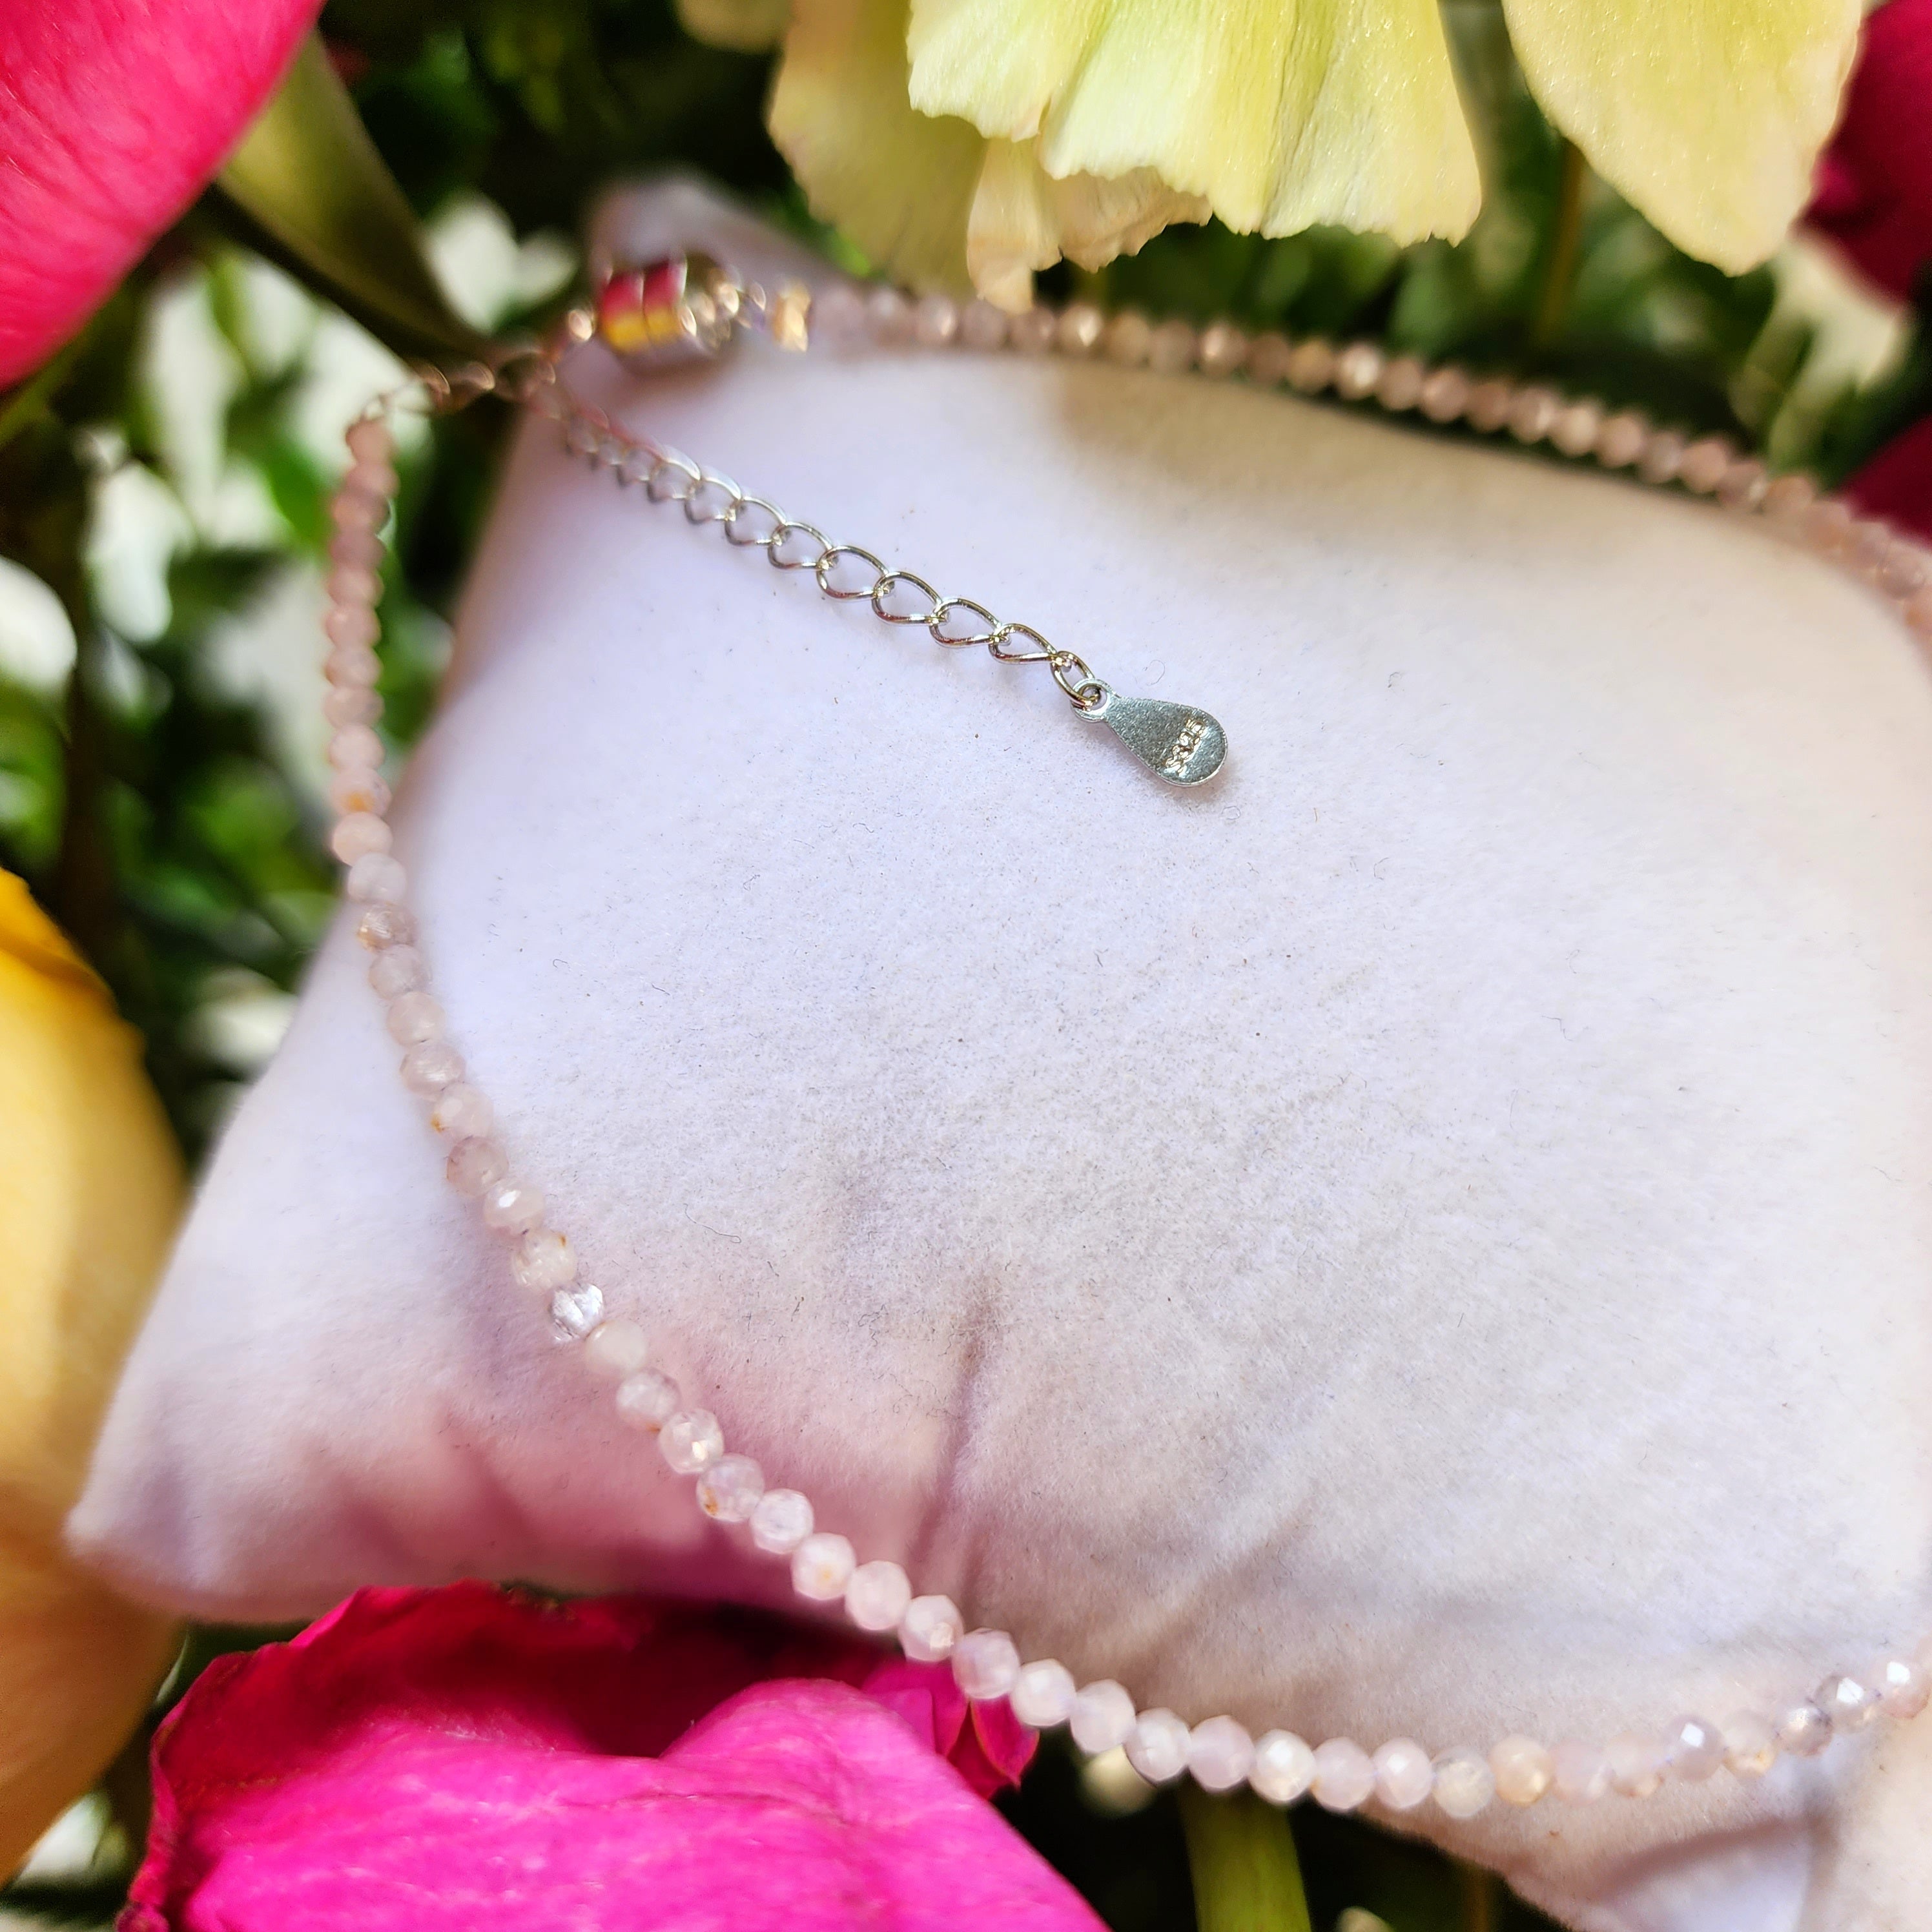 Kunzite Micro Faceted Anklet .925 Silver for Harmonizing Relationships and your Space